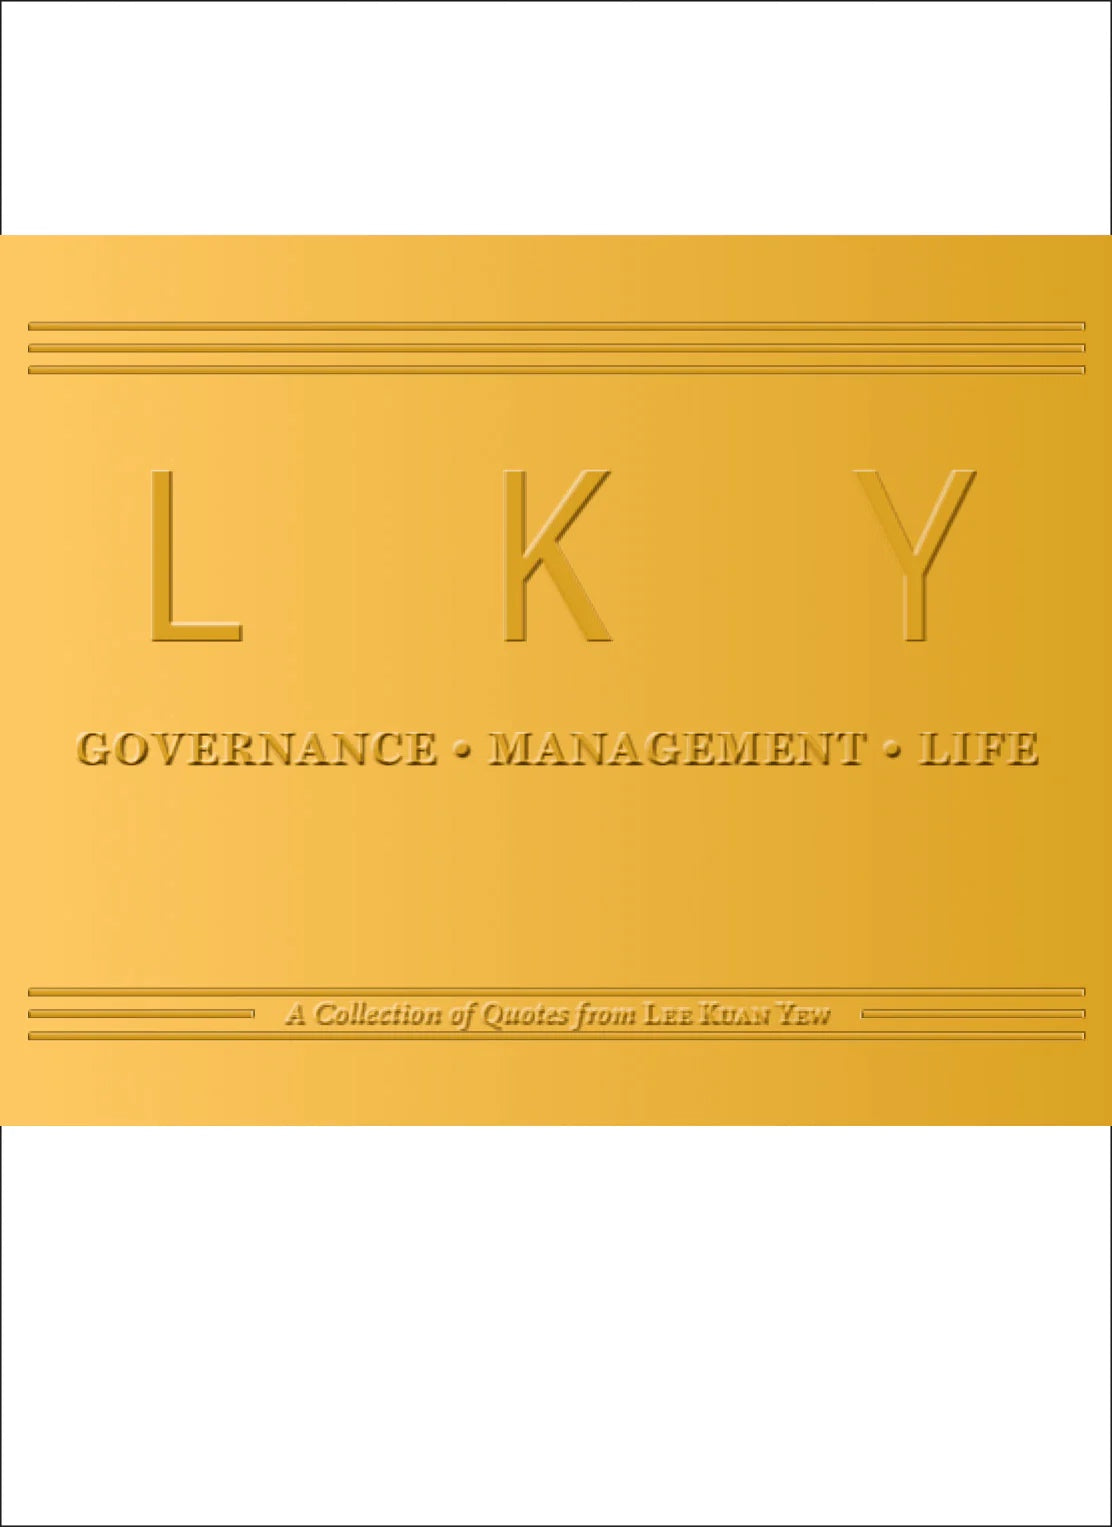 LKY on Governance, Management, Life: A Collection of Quotes from Lee Kuan Yew